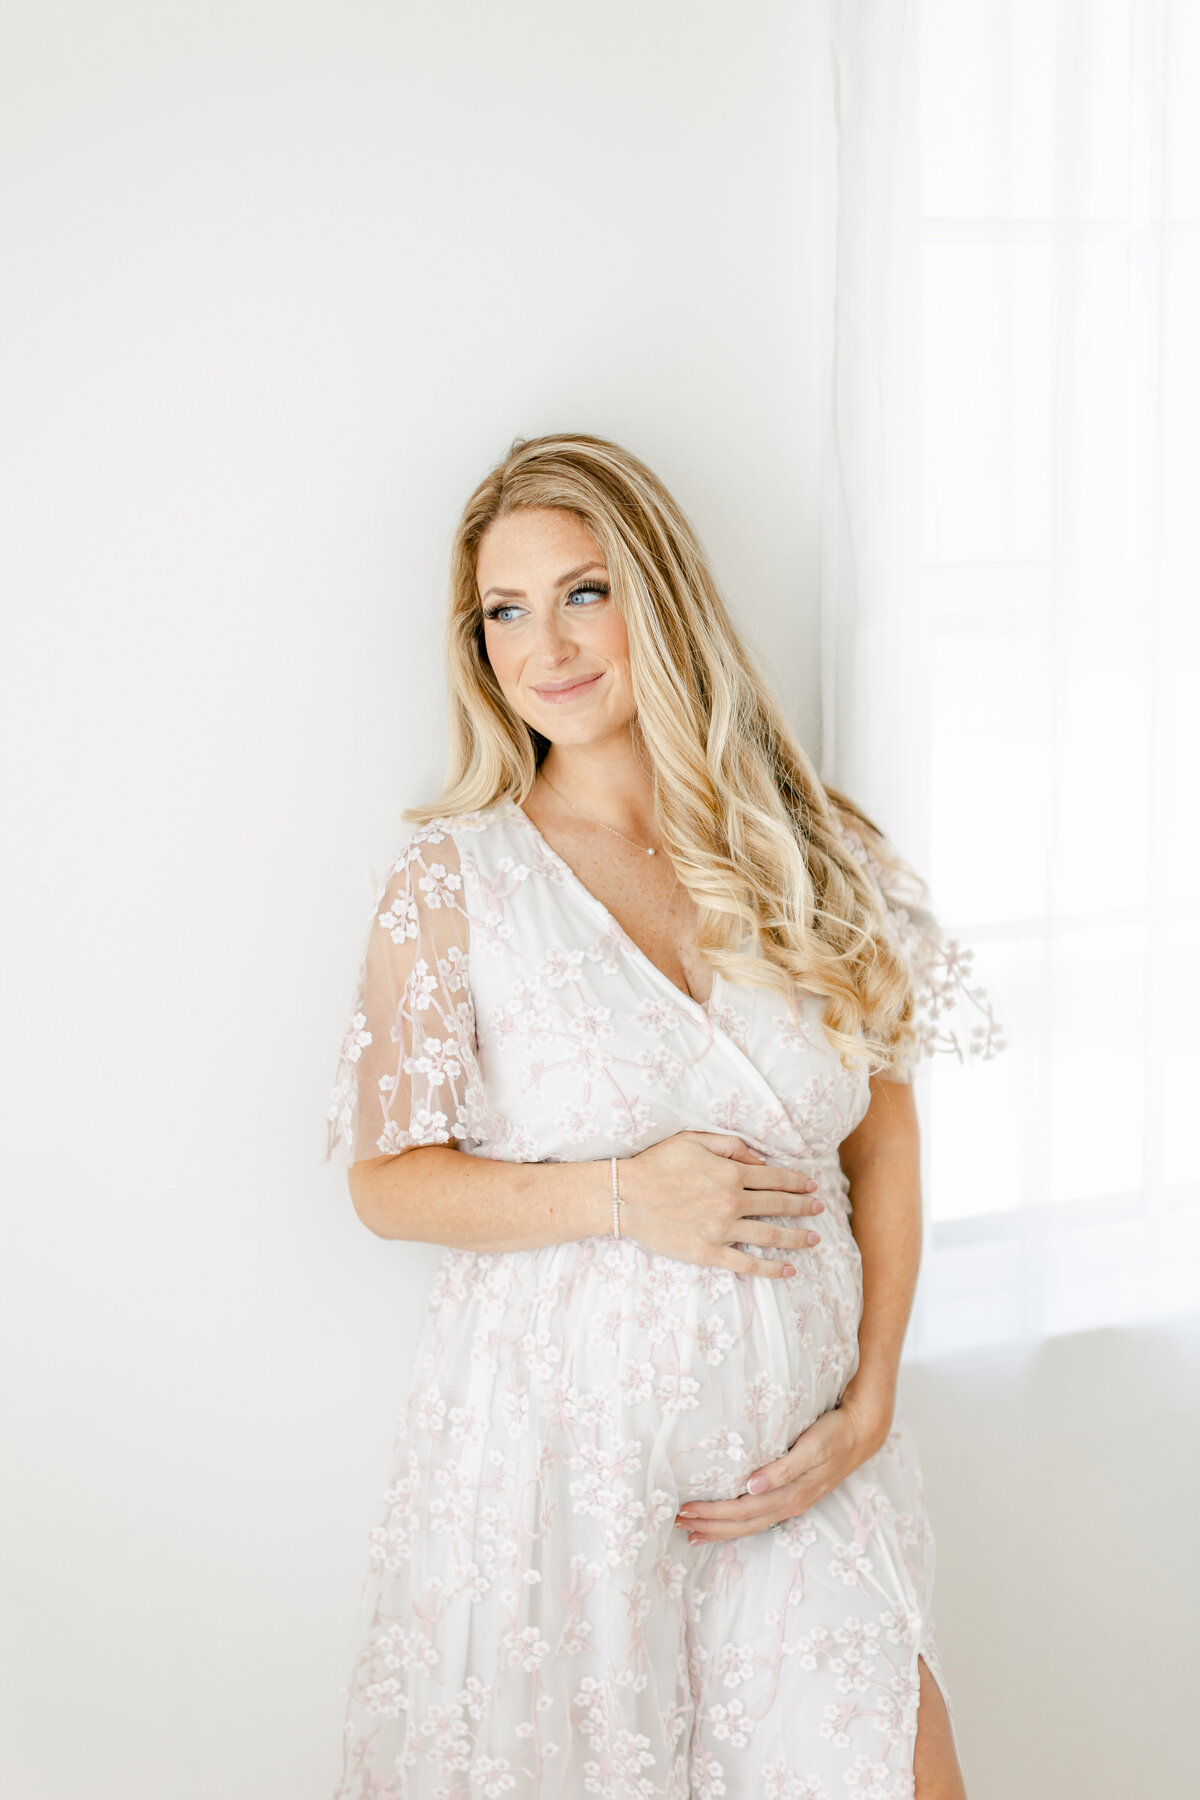 Stunning expectant mother in South Jersey Newborn Photography studio